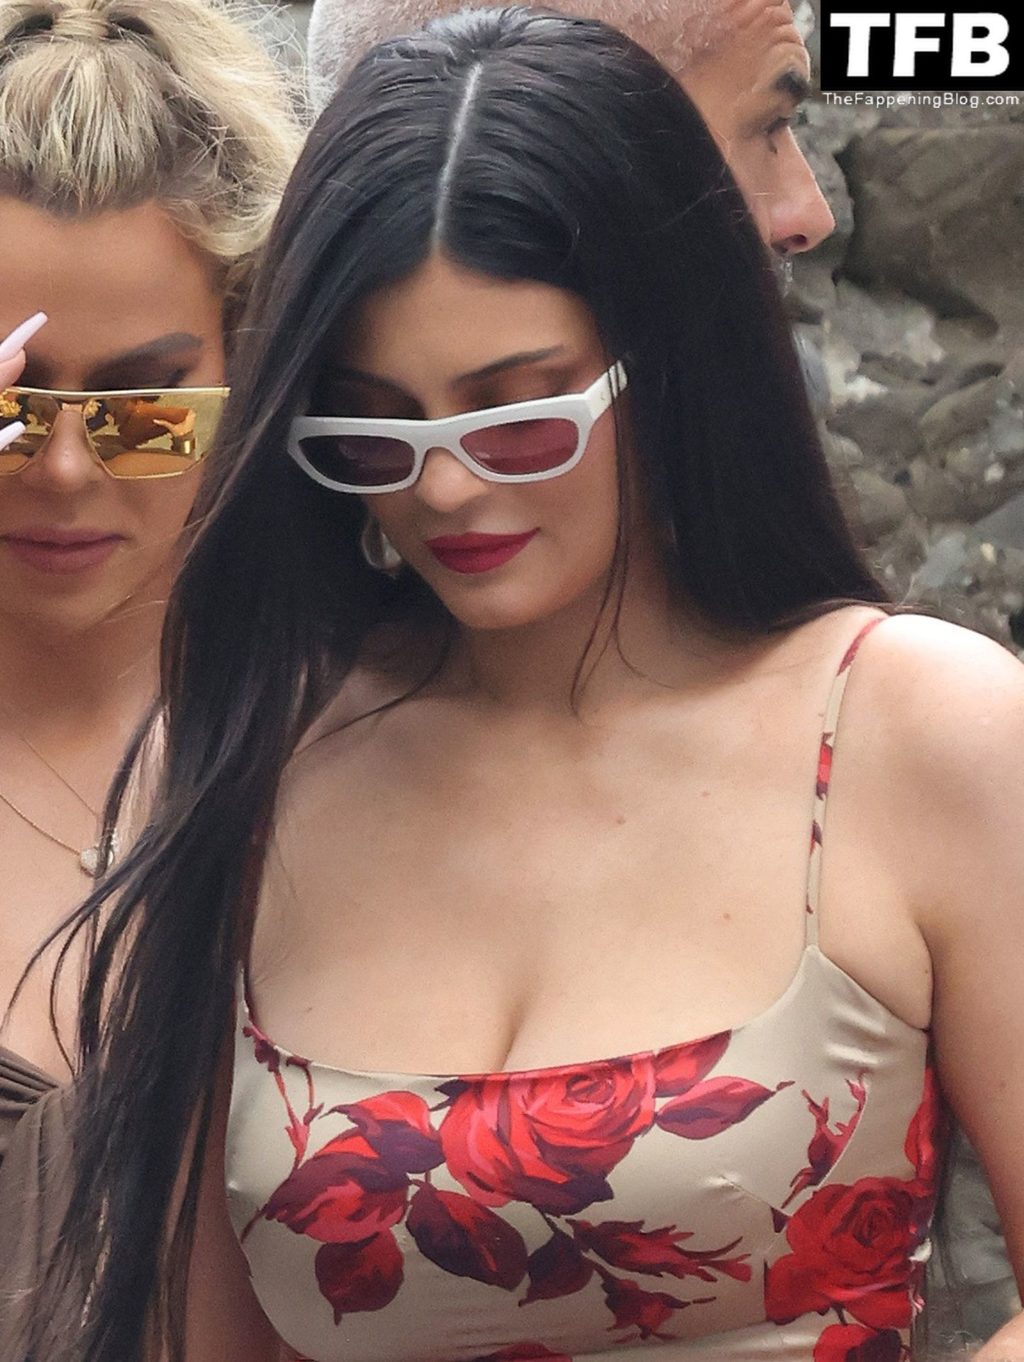 Kylie Jenner Sexy The Fappening Blog 14 1024x1362 - Kylie Jenner Flaunts Her Curves in Portofino (32 Photos)